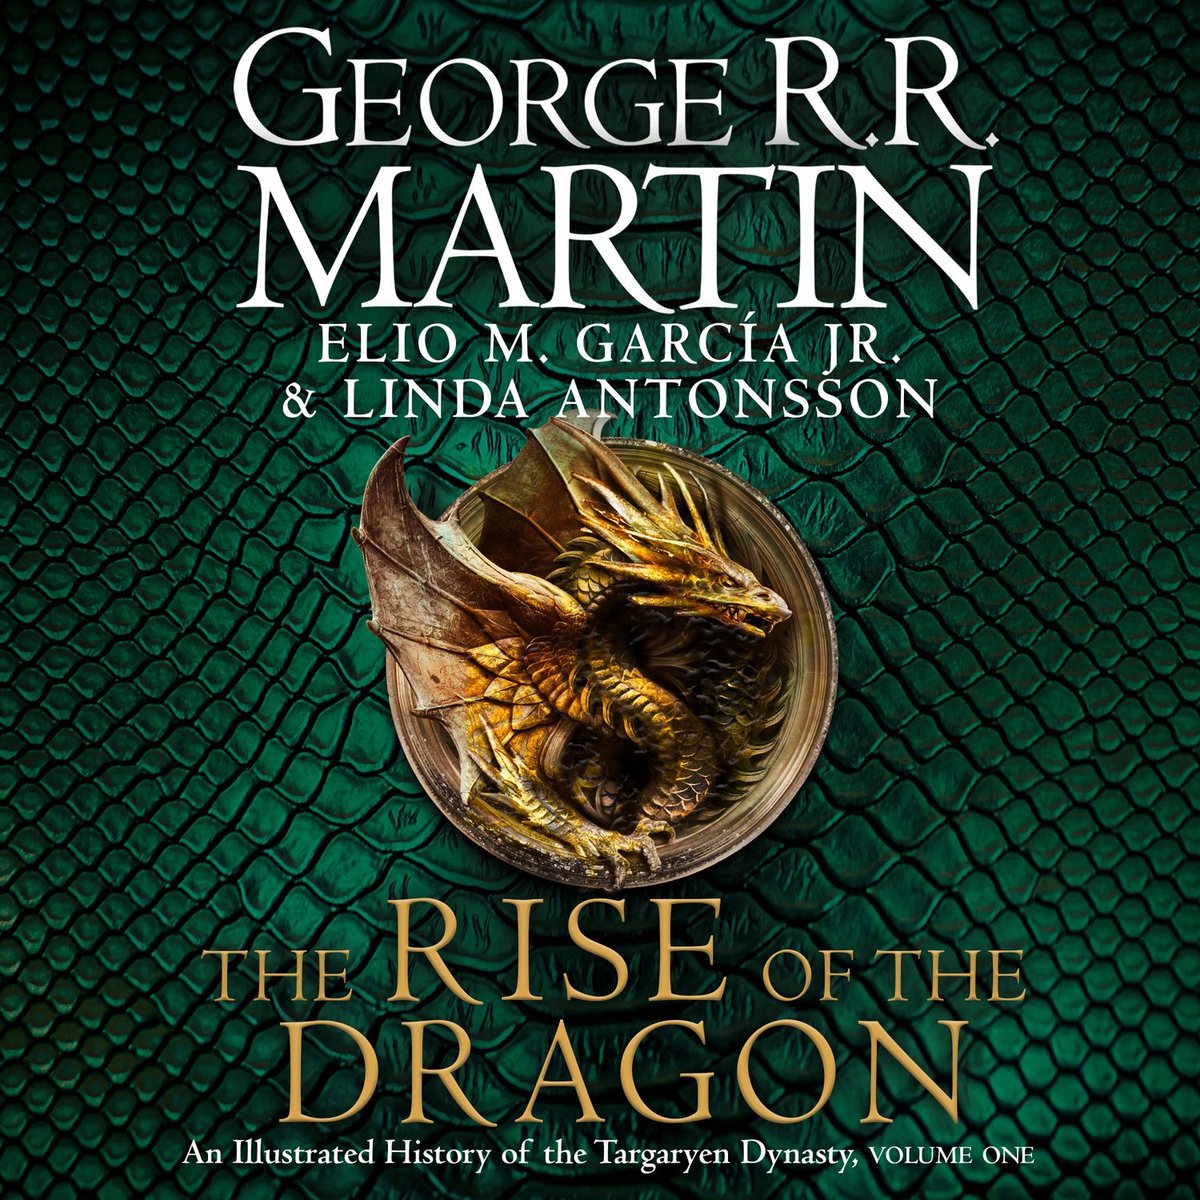 The Rise of the Dragon: An Illustrated History of the Targaryen Dynasty. The inspiration for 2022’s highly anticipated HBO and Sky TV series HOUSE OF THE DRAGON from the internationally bestselling creator of epic fantasy classic GAME OF THRONES - George R.R. Martin